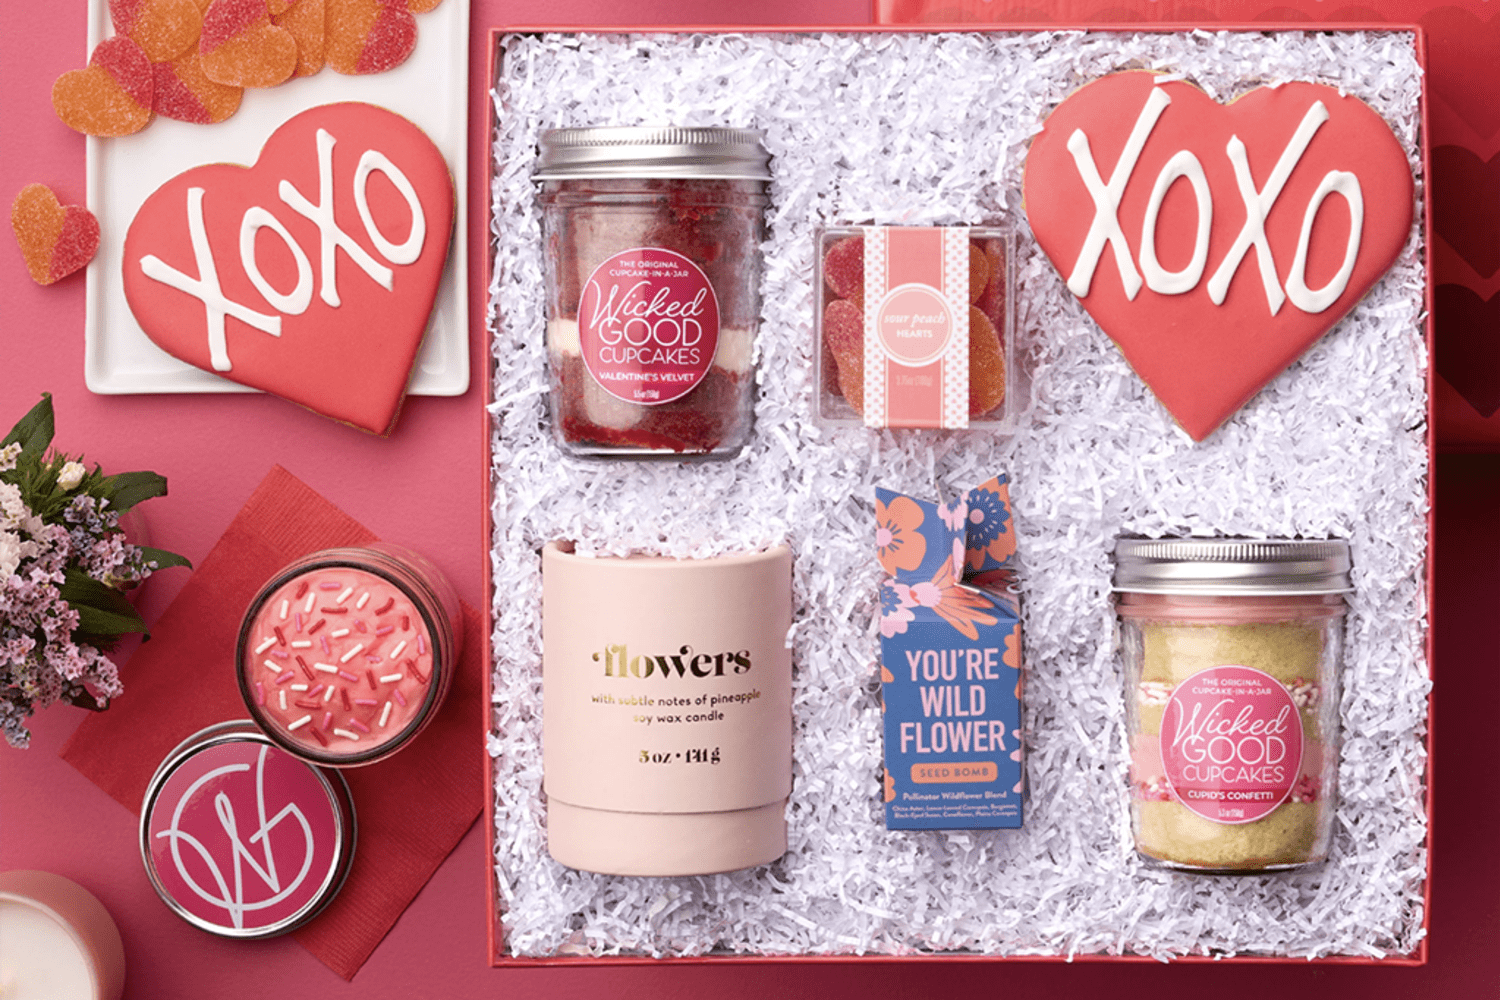 It's Time to Wow Your Loved One This Valentine's with Unique